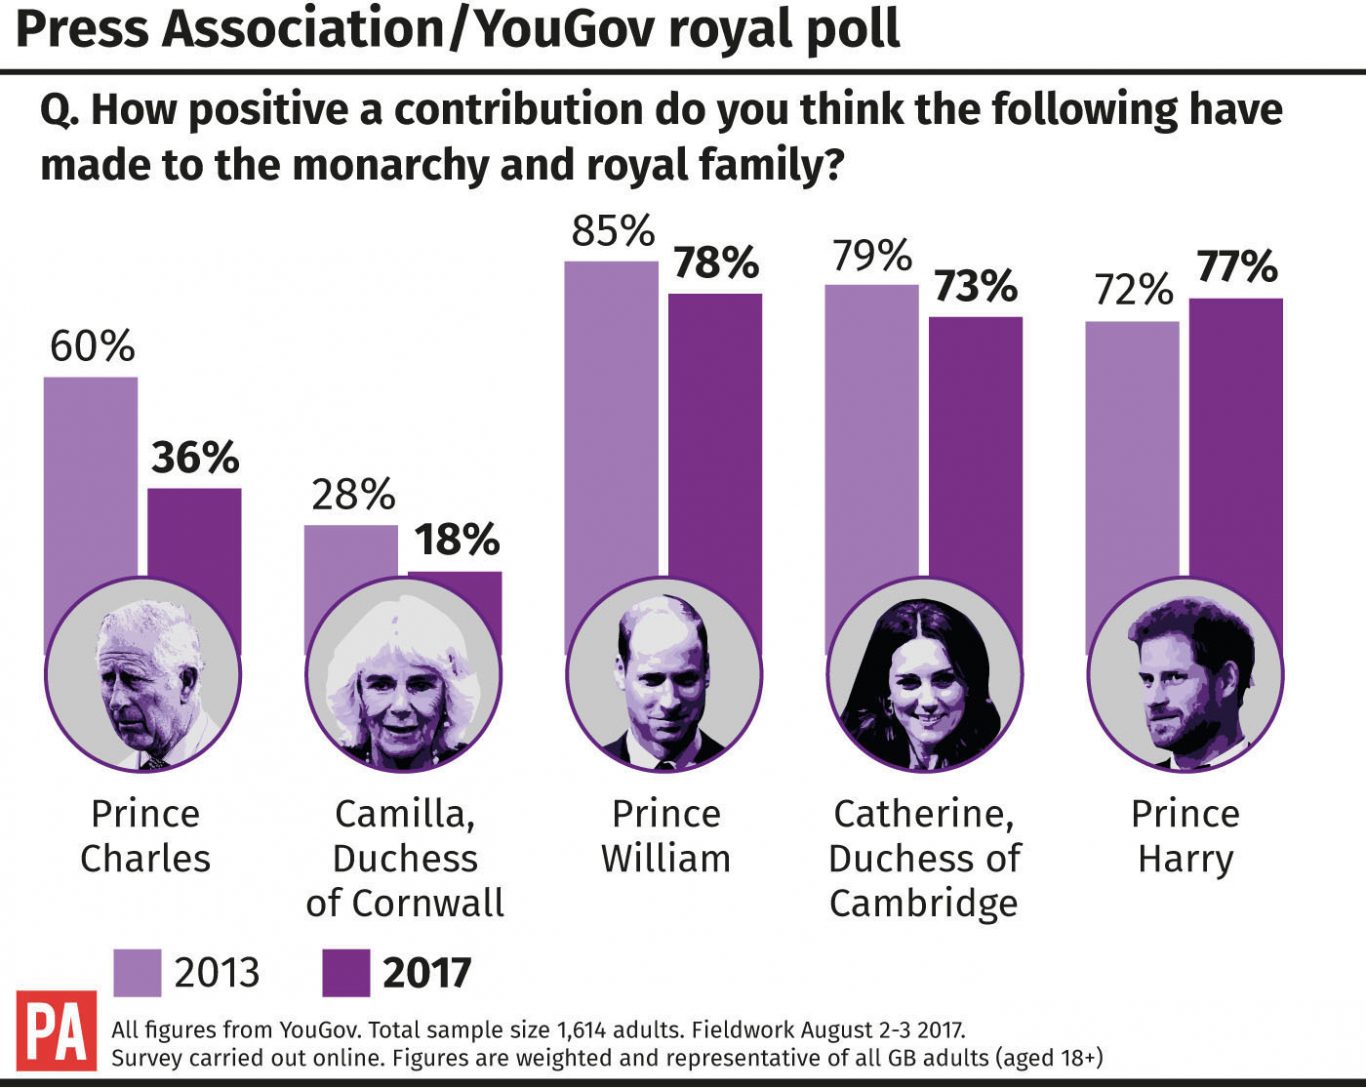 Prince of Wales’ popularity falls in runup to Diana anniversary, poll